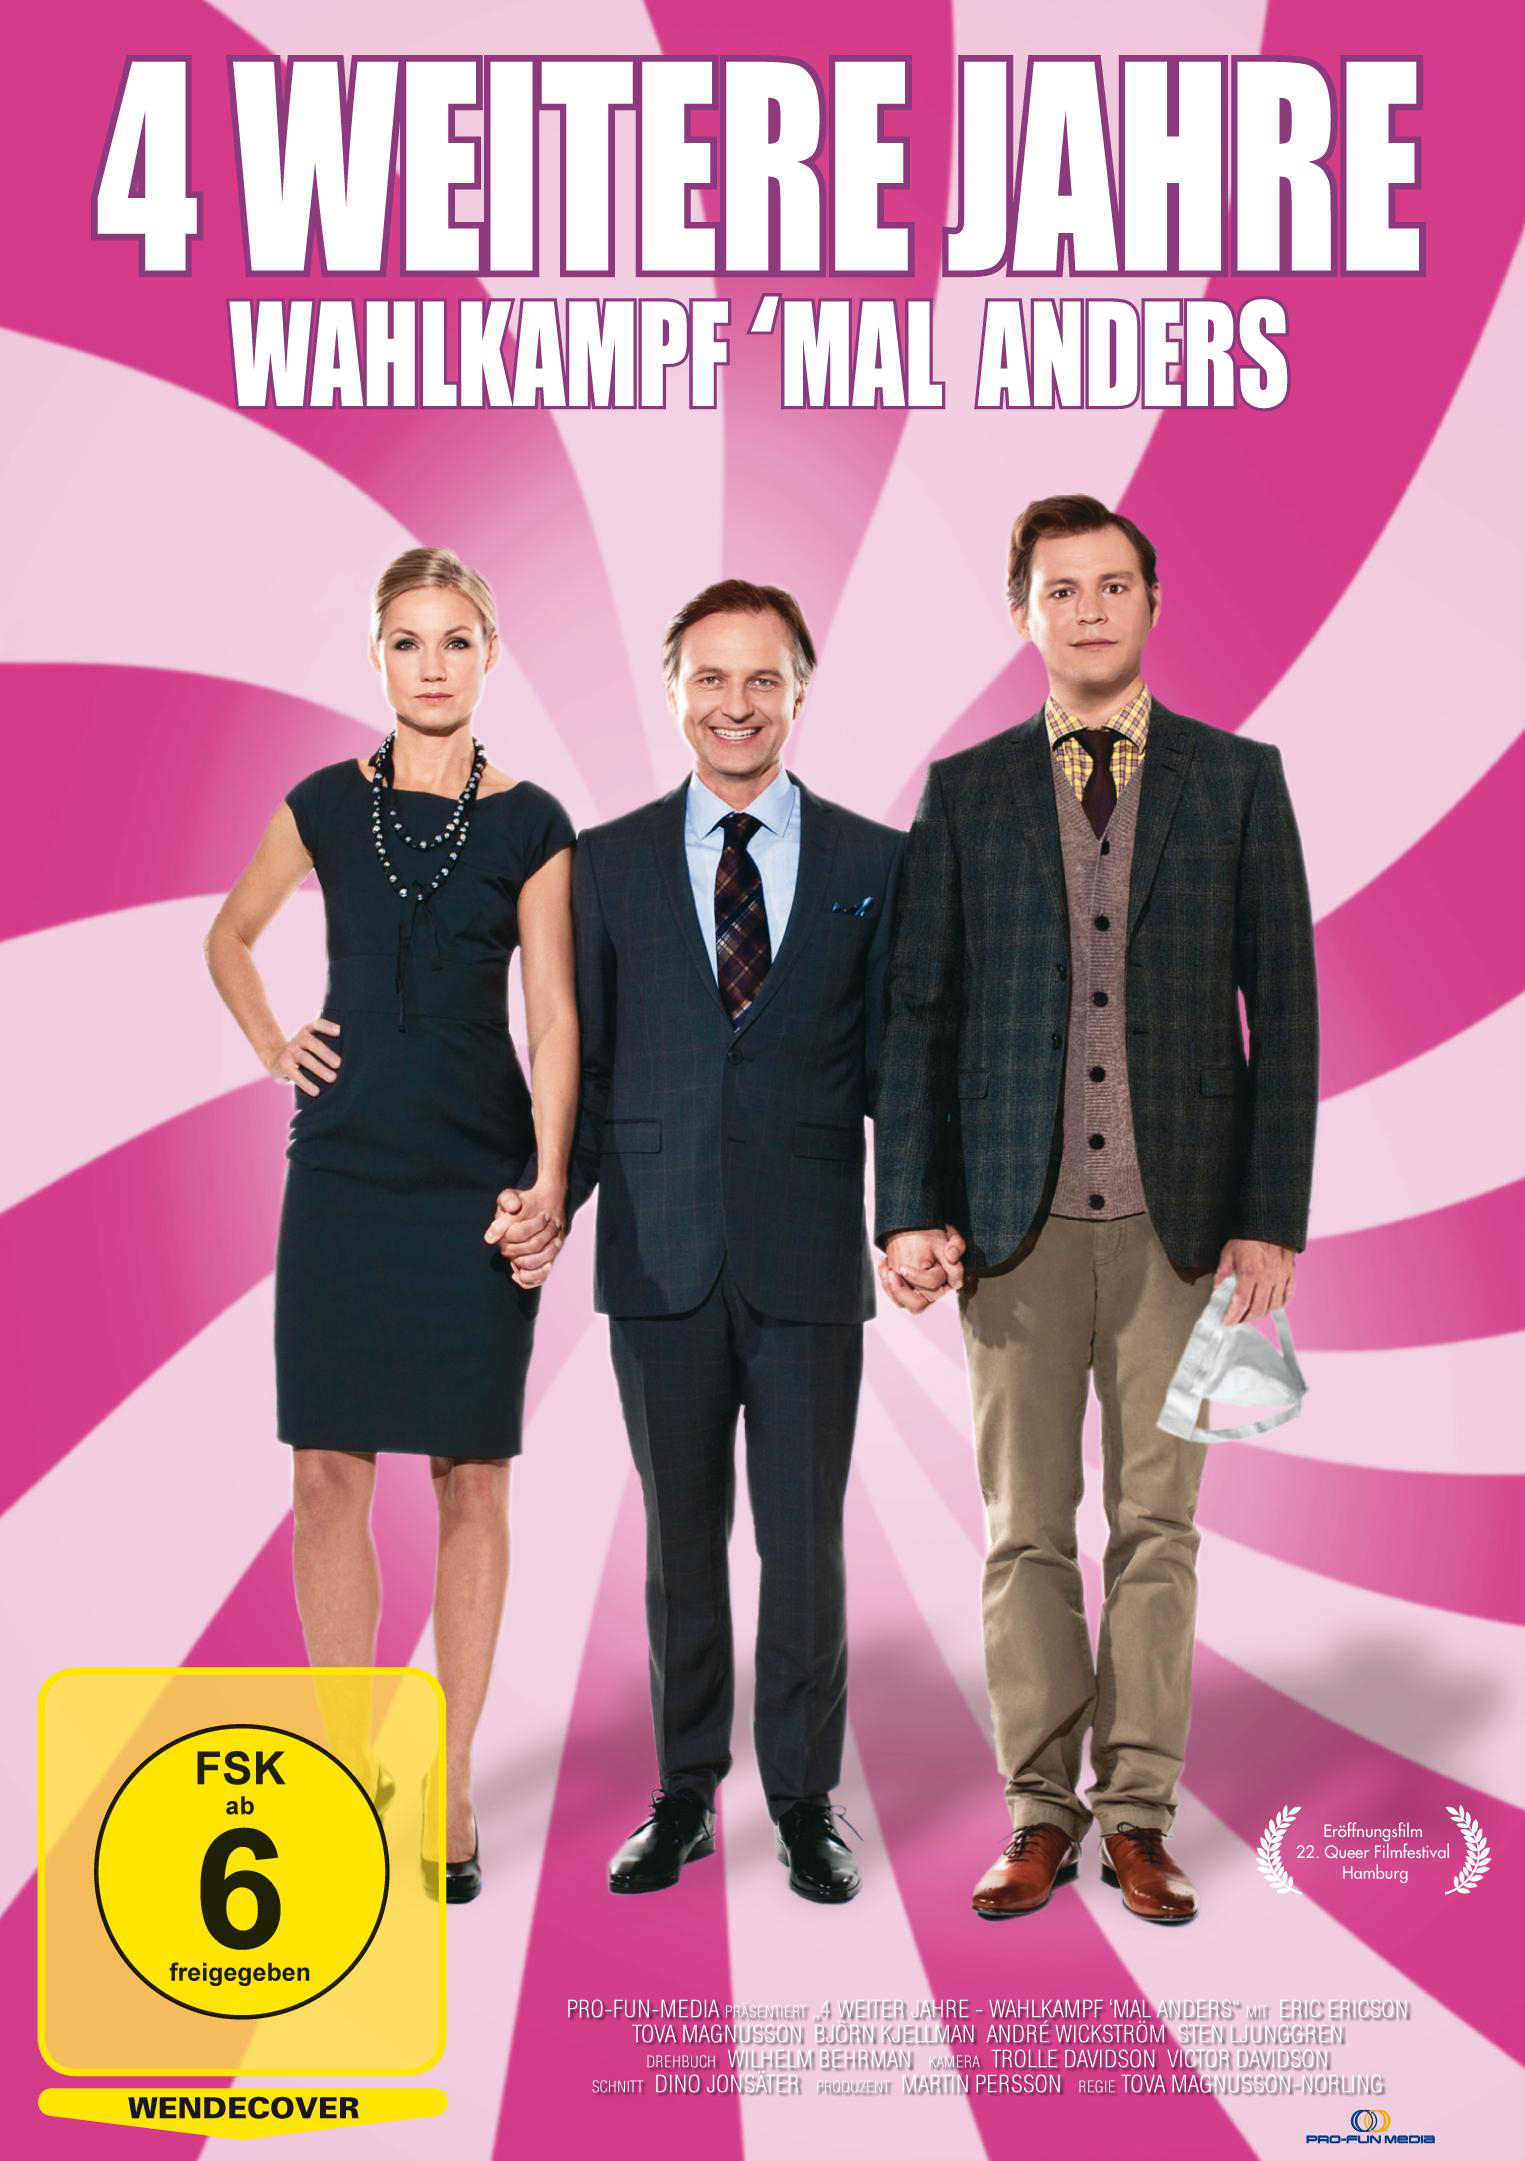 4 weitere DVD \'mal - anders Jahre Wahlkampf